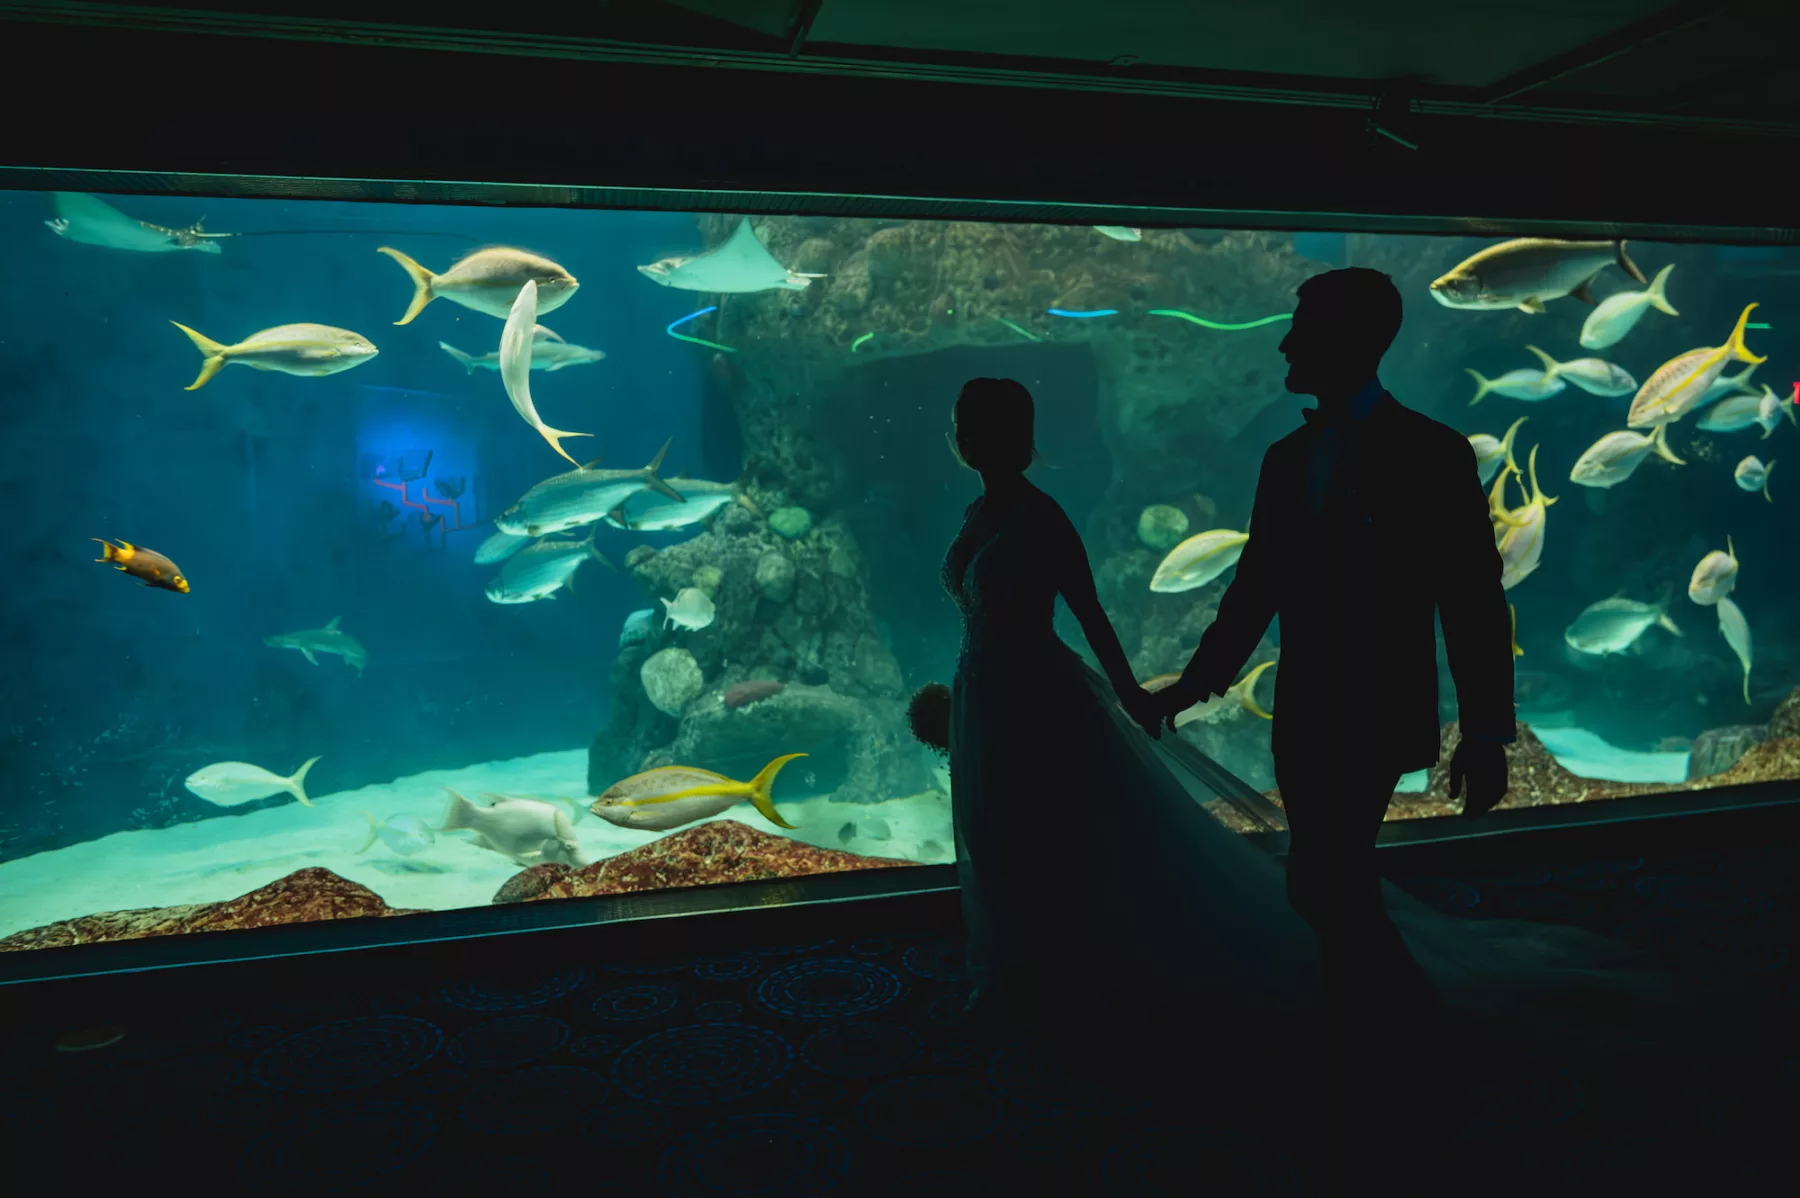 Bride and Groom Just Married Coral Reef Gallery Wedding Portrait | Tampa Bay Event Venue The Florida Aquarium